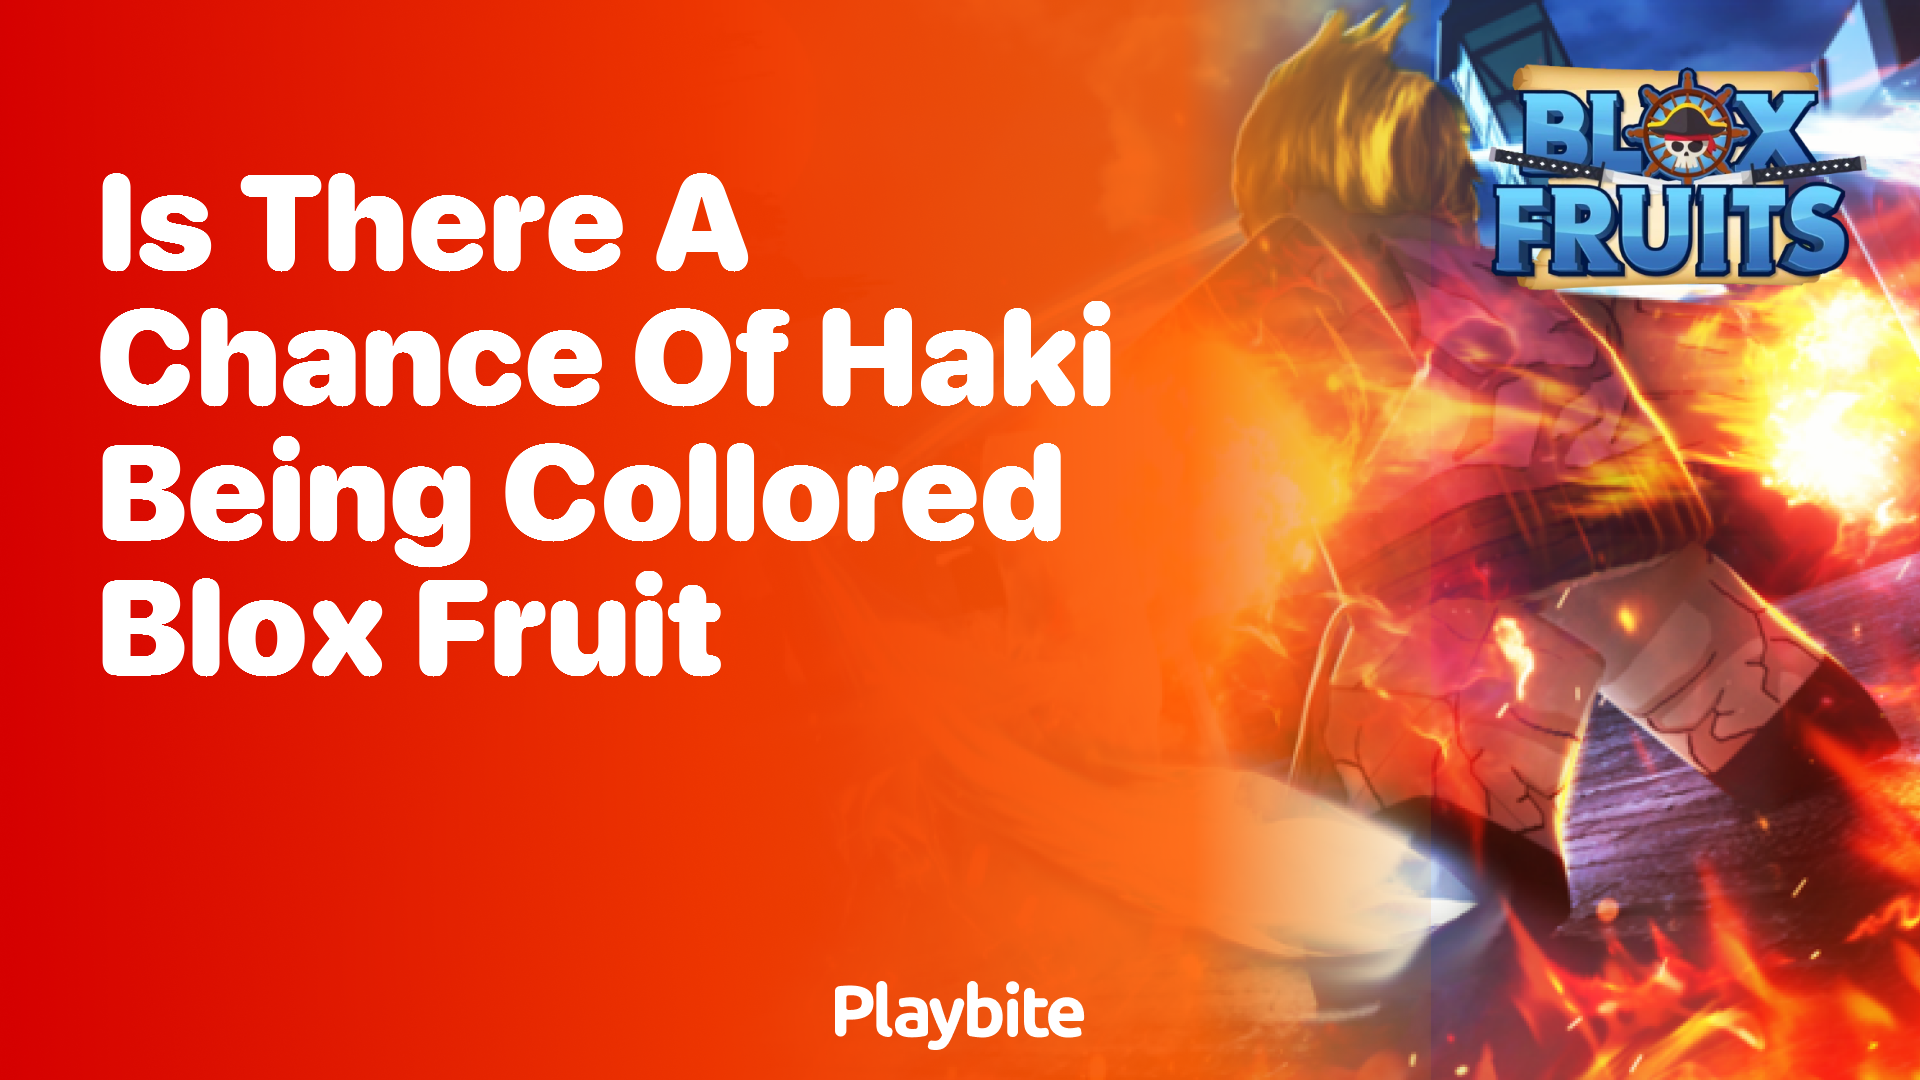 Is There a Chance of Haki Being Colored in Blox Fruit?